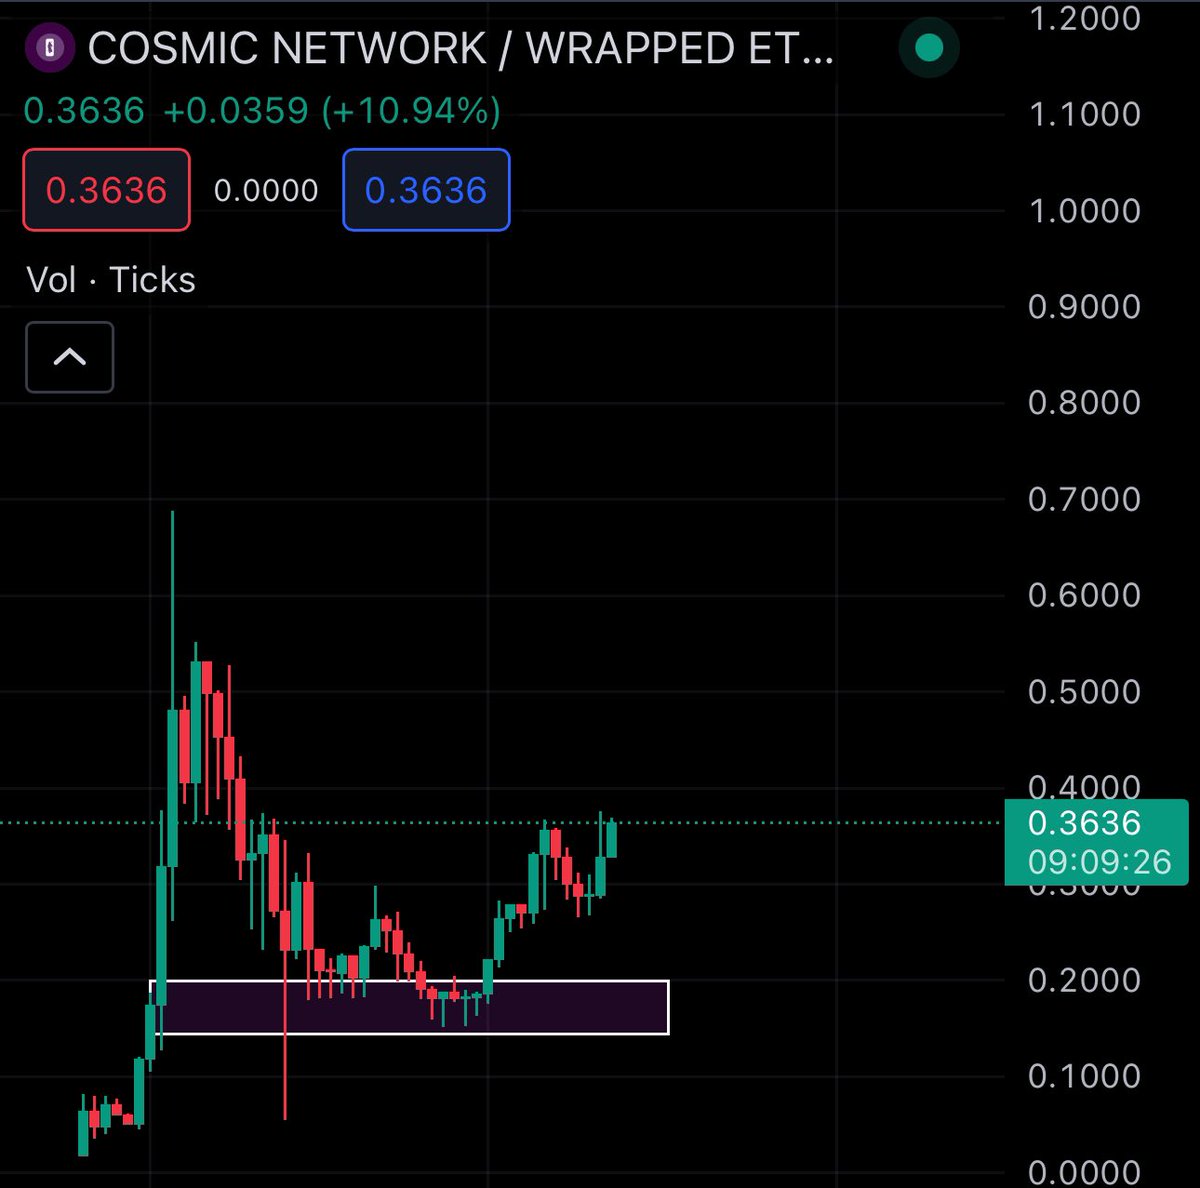 $COSMIC is literally going up only, yet you’re too afraid because someone said that we’re “back in a bear market”. LEARN TO ADD THE DOTS UP. DOXXED TEAM + REAL UTILITY + MASSIVE MARKET SIZE = VERY OBVIOUS CHOICE. This market is BRUTAL. You either man up, learn to take